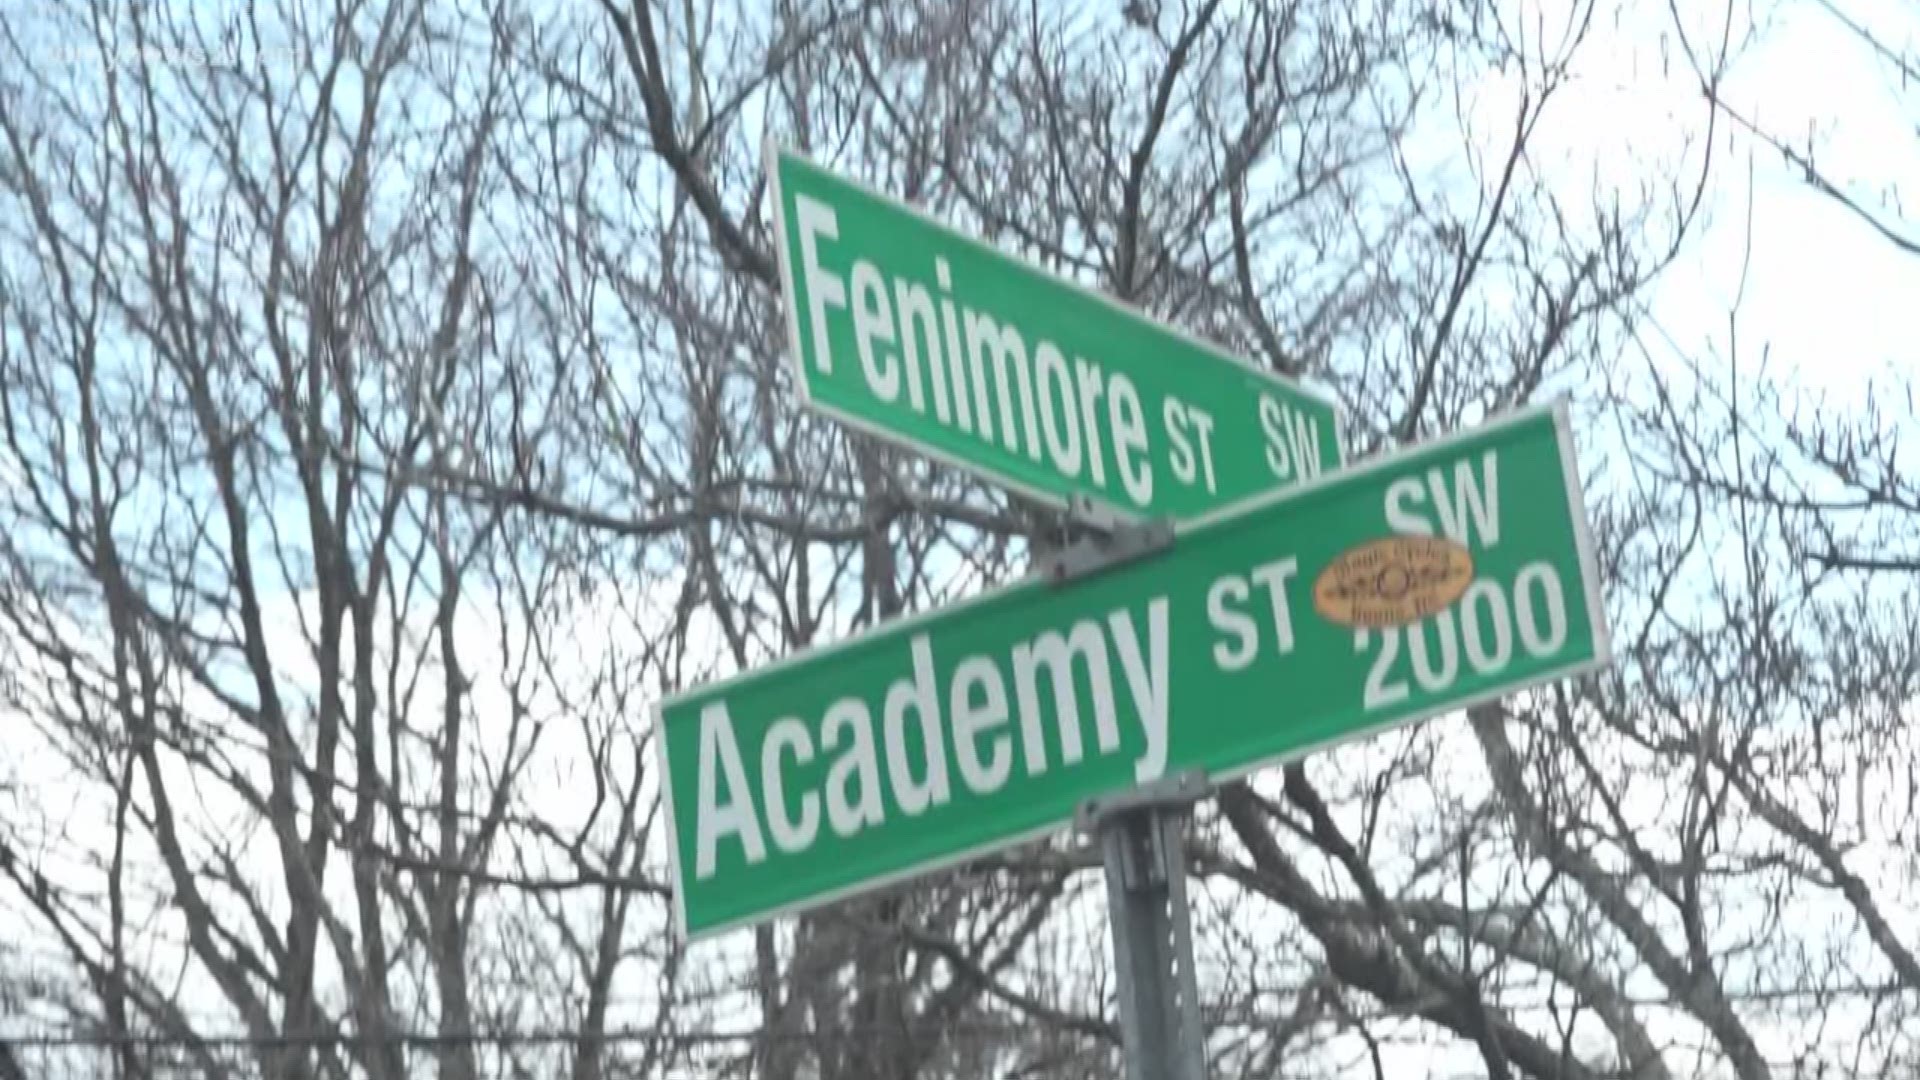 The first incident happened earlier this month on Fenimore Street. The second happened this week on Melrose Street near Sherwood Drive.